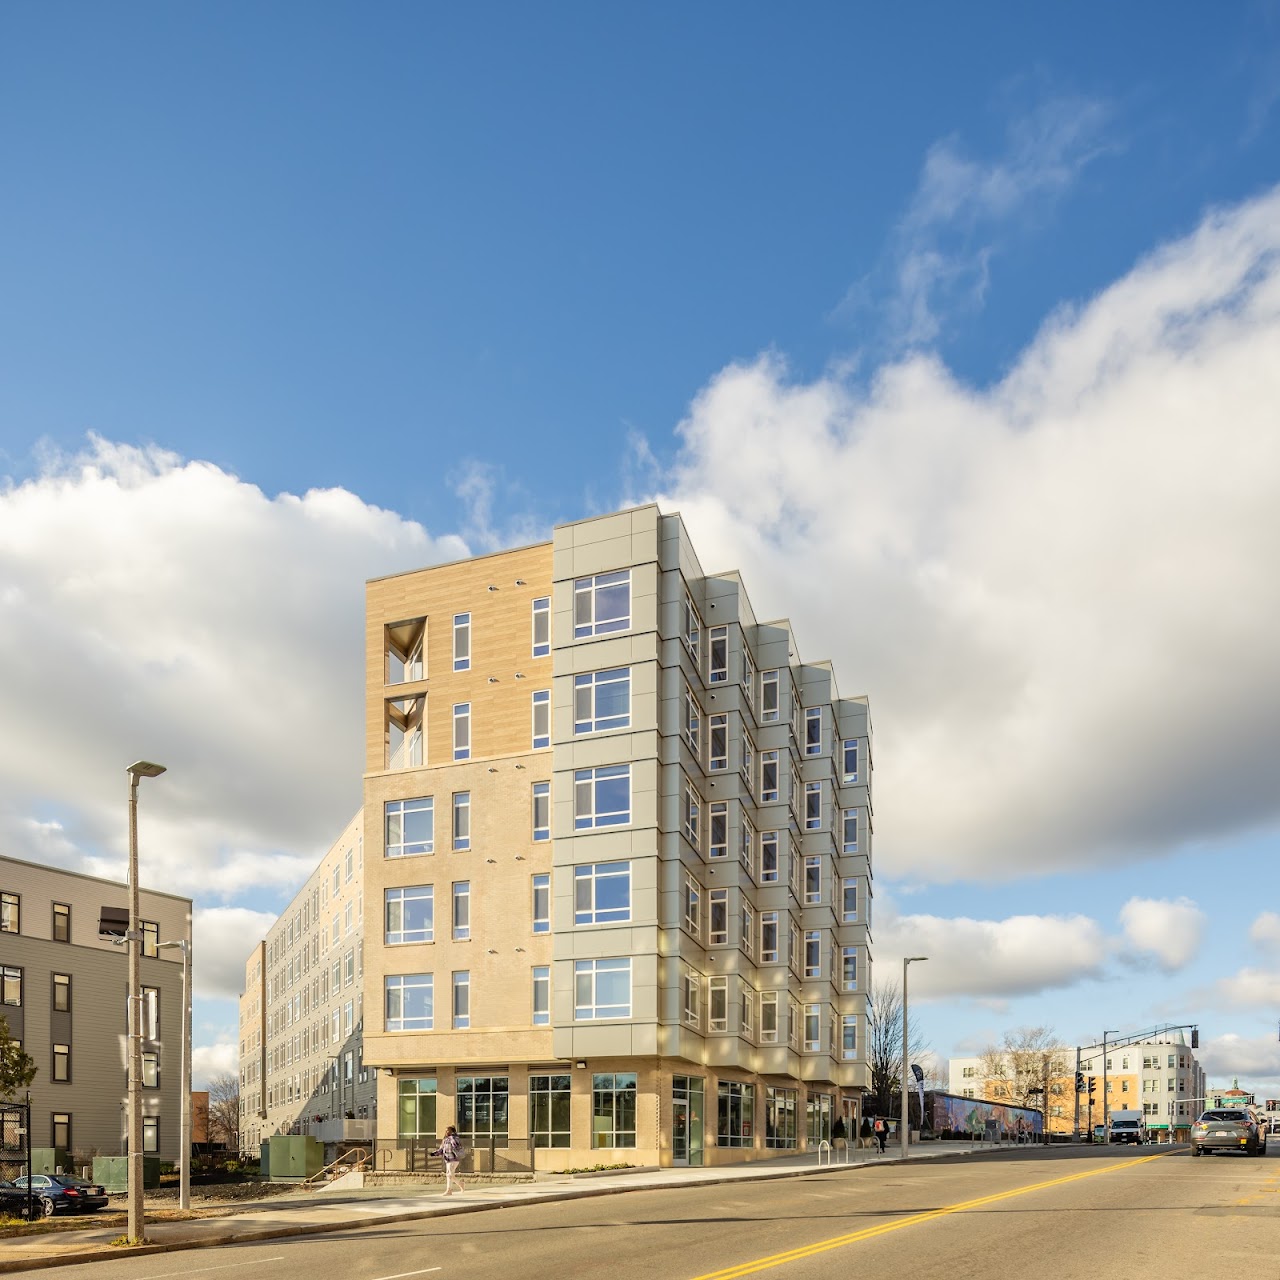 Photo of CWL HOUSING. Affordable housing located at 270 CENTRE ST BOSTON, MA 02130